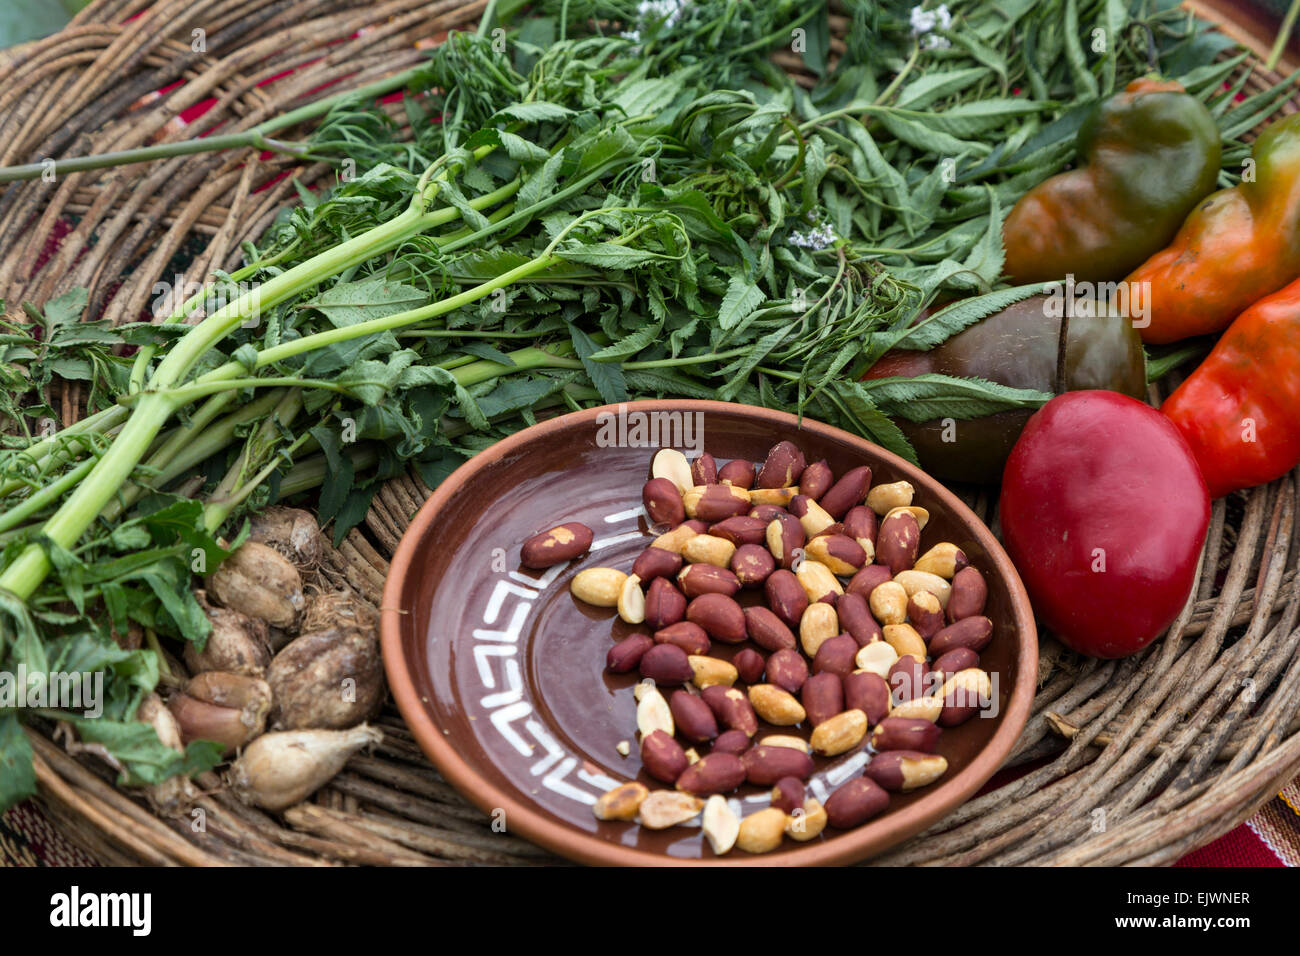 Peru, Urubamba Valley, Quechua Village of Misminay.  Peanuts, Tomato, Pepper, and Huacatay, an Herb Used in Peruvian Cooking. Stock Photo